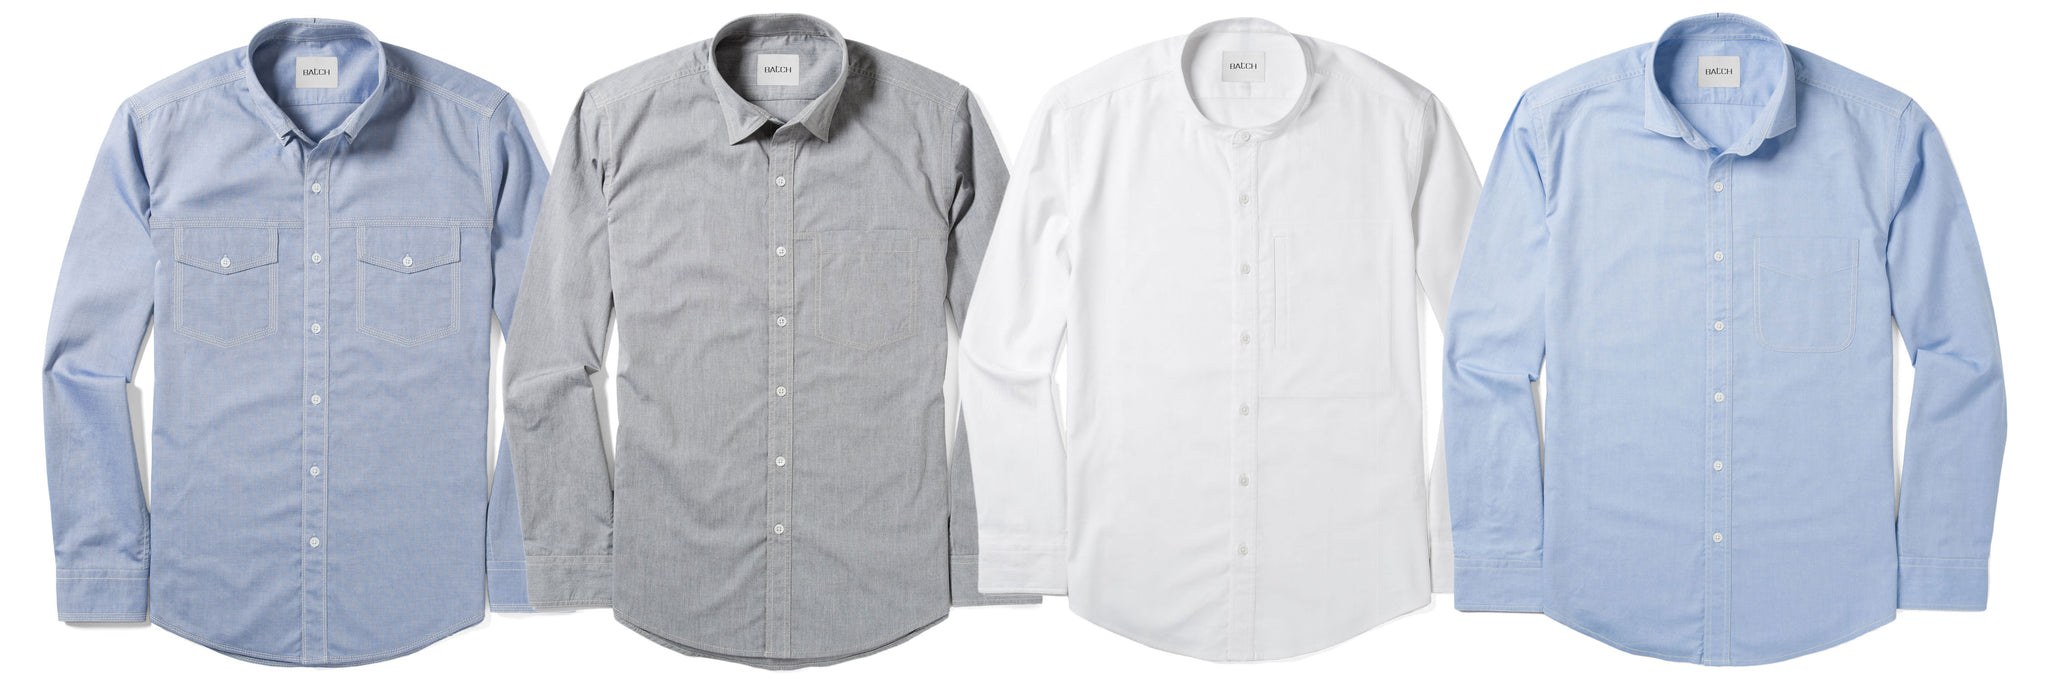 Types of Dress Shirts for Men from Casual to Formal